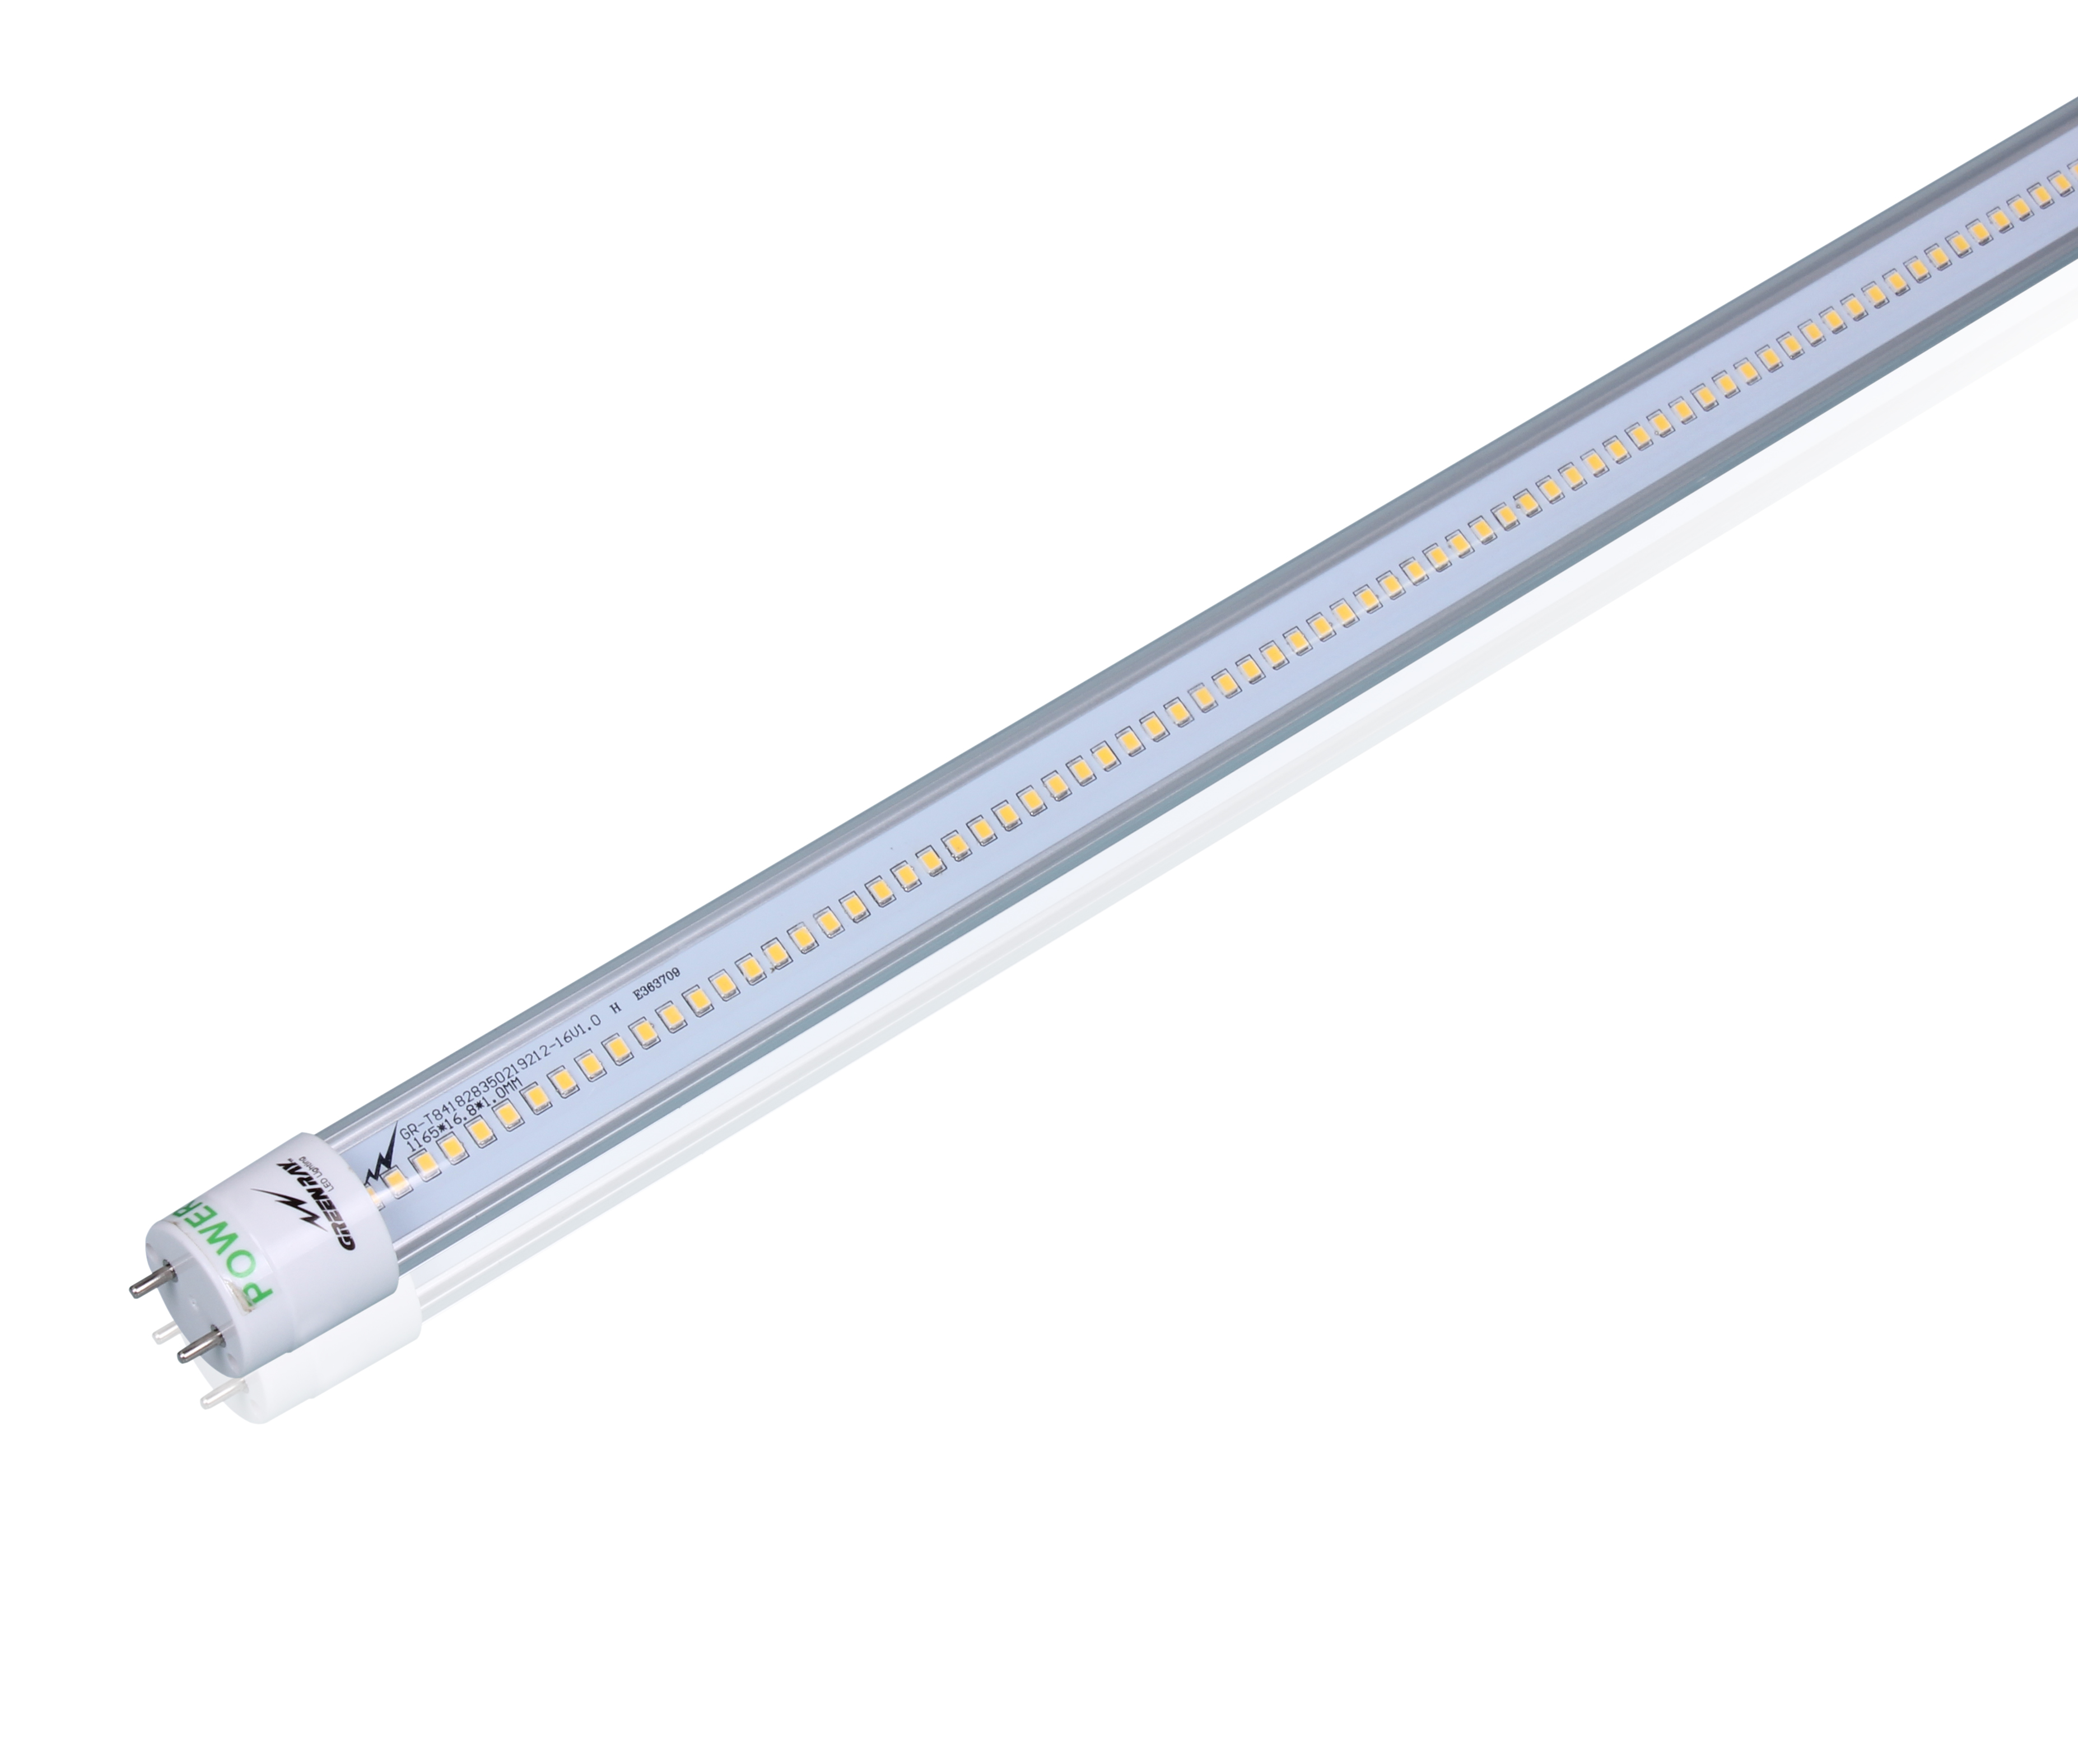 T8 LED tube, 600mm, 9W, 80Ra 120lm/W, CE\RoHS\UL certificated, 5 years warranty, SMD 2835